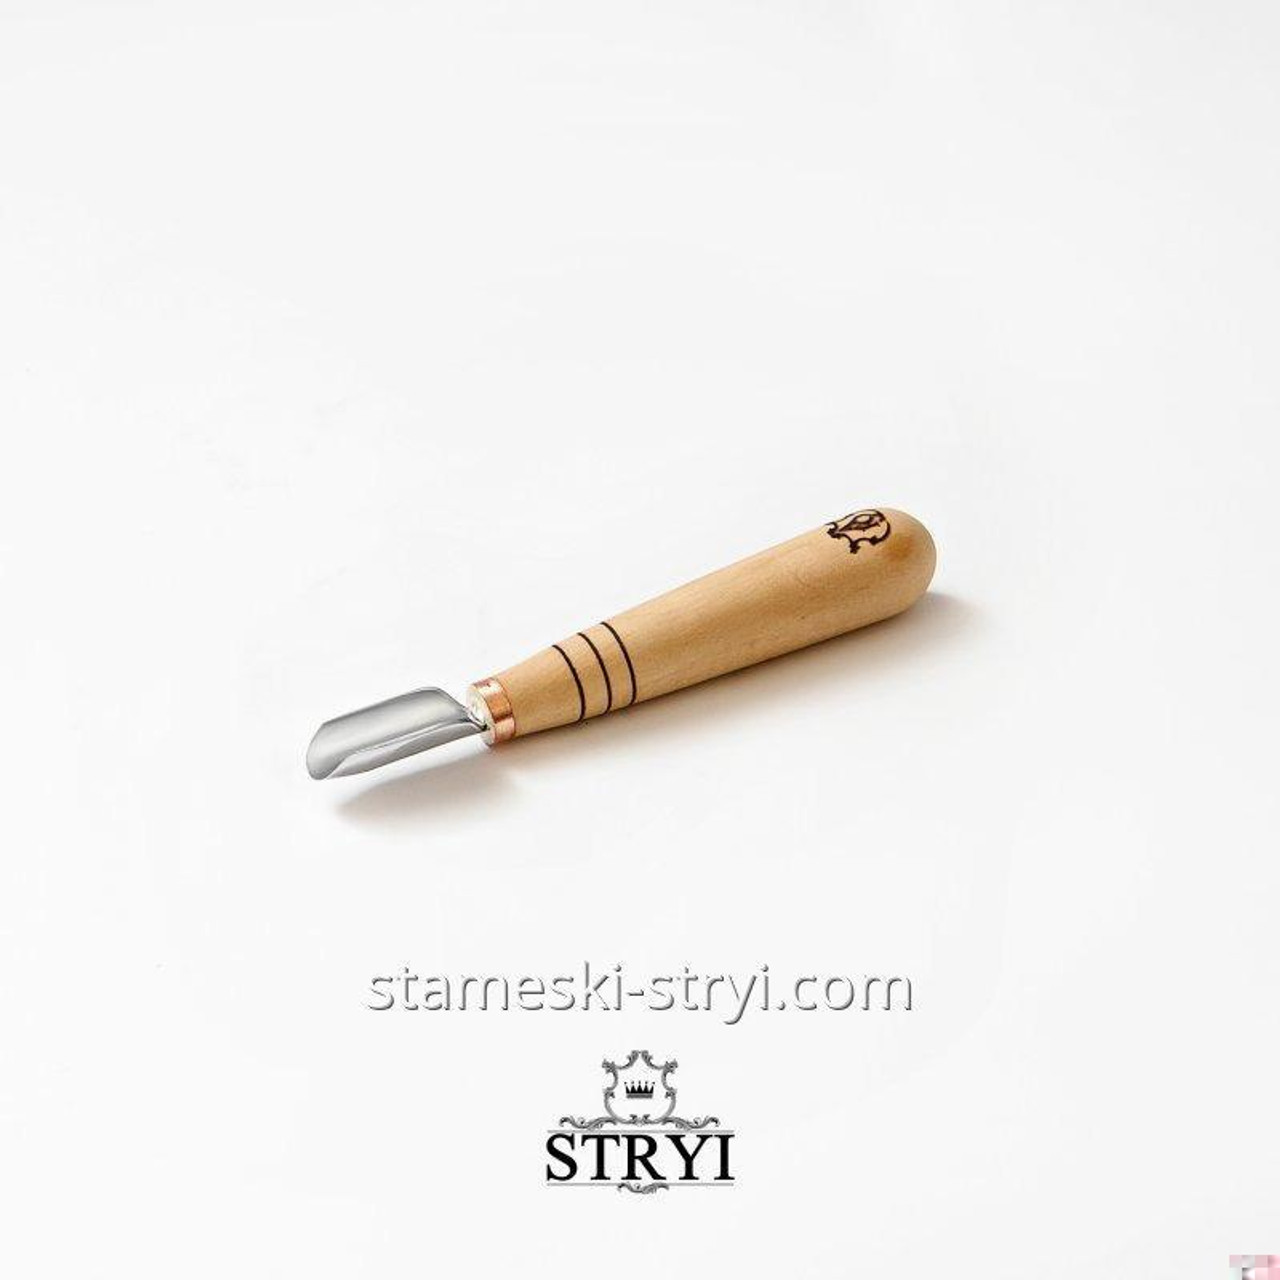 The Stryi Shorty Beveled Semi-Circular Gouge 15mm provides an ergonomically shaped handle with a deep sweep.